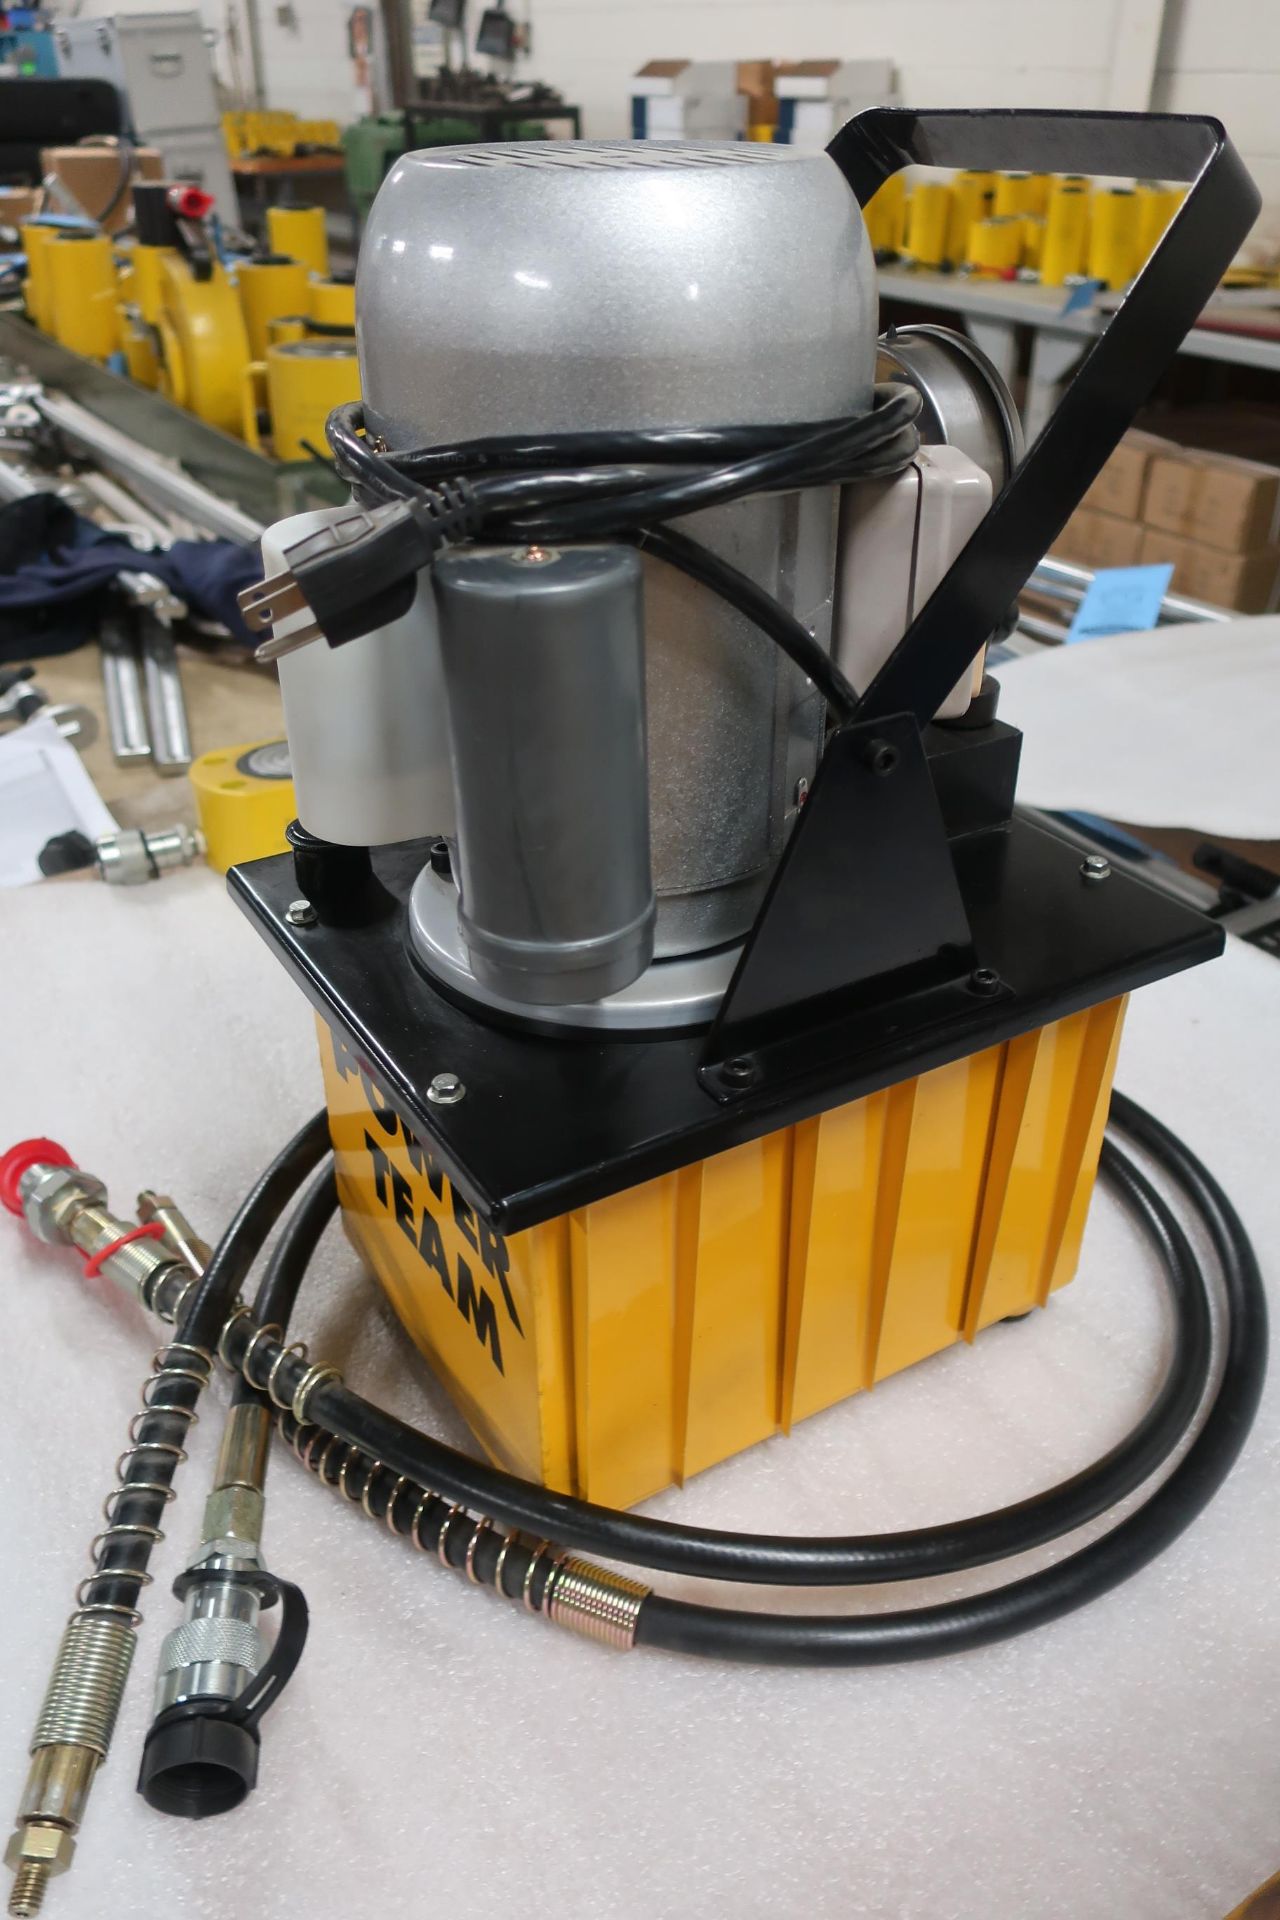 Power Team Hydraulics Electric Powerpack type - 120V single phase hydraulic pump - UNUSED & MINT